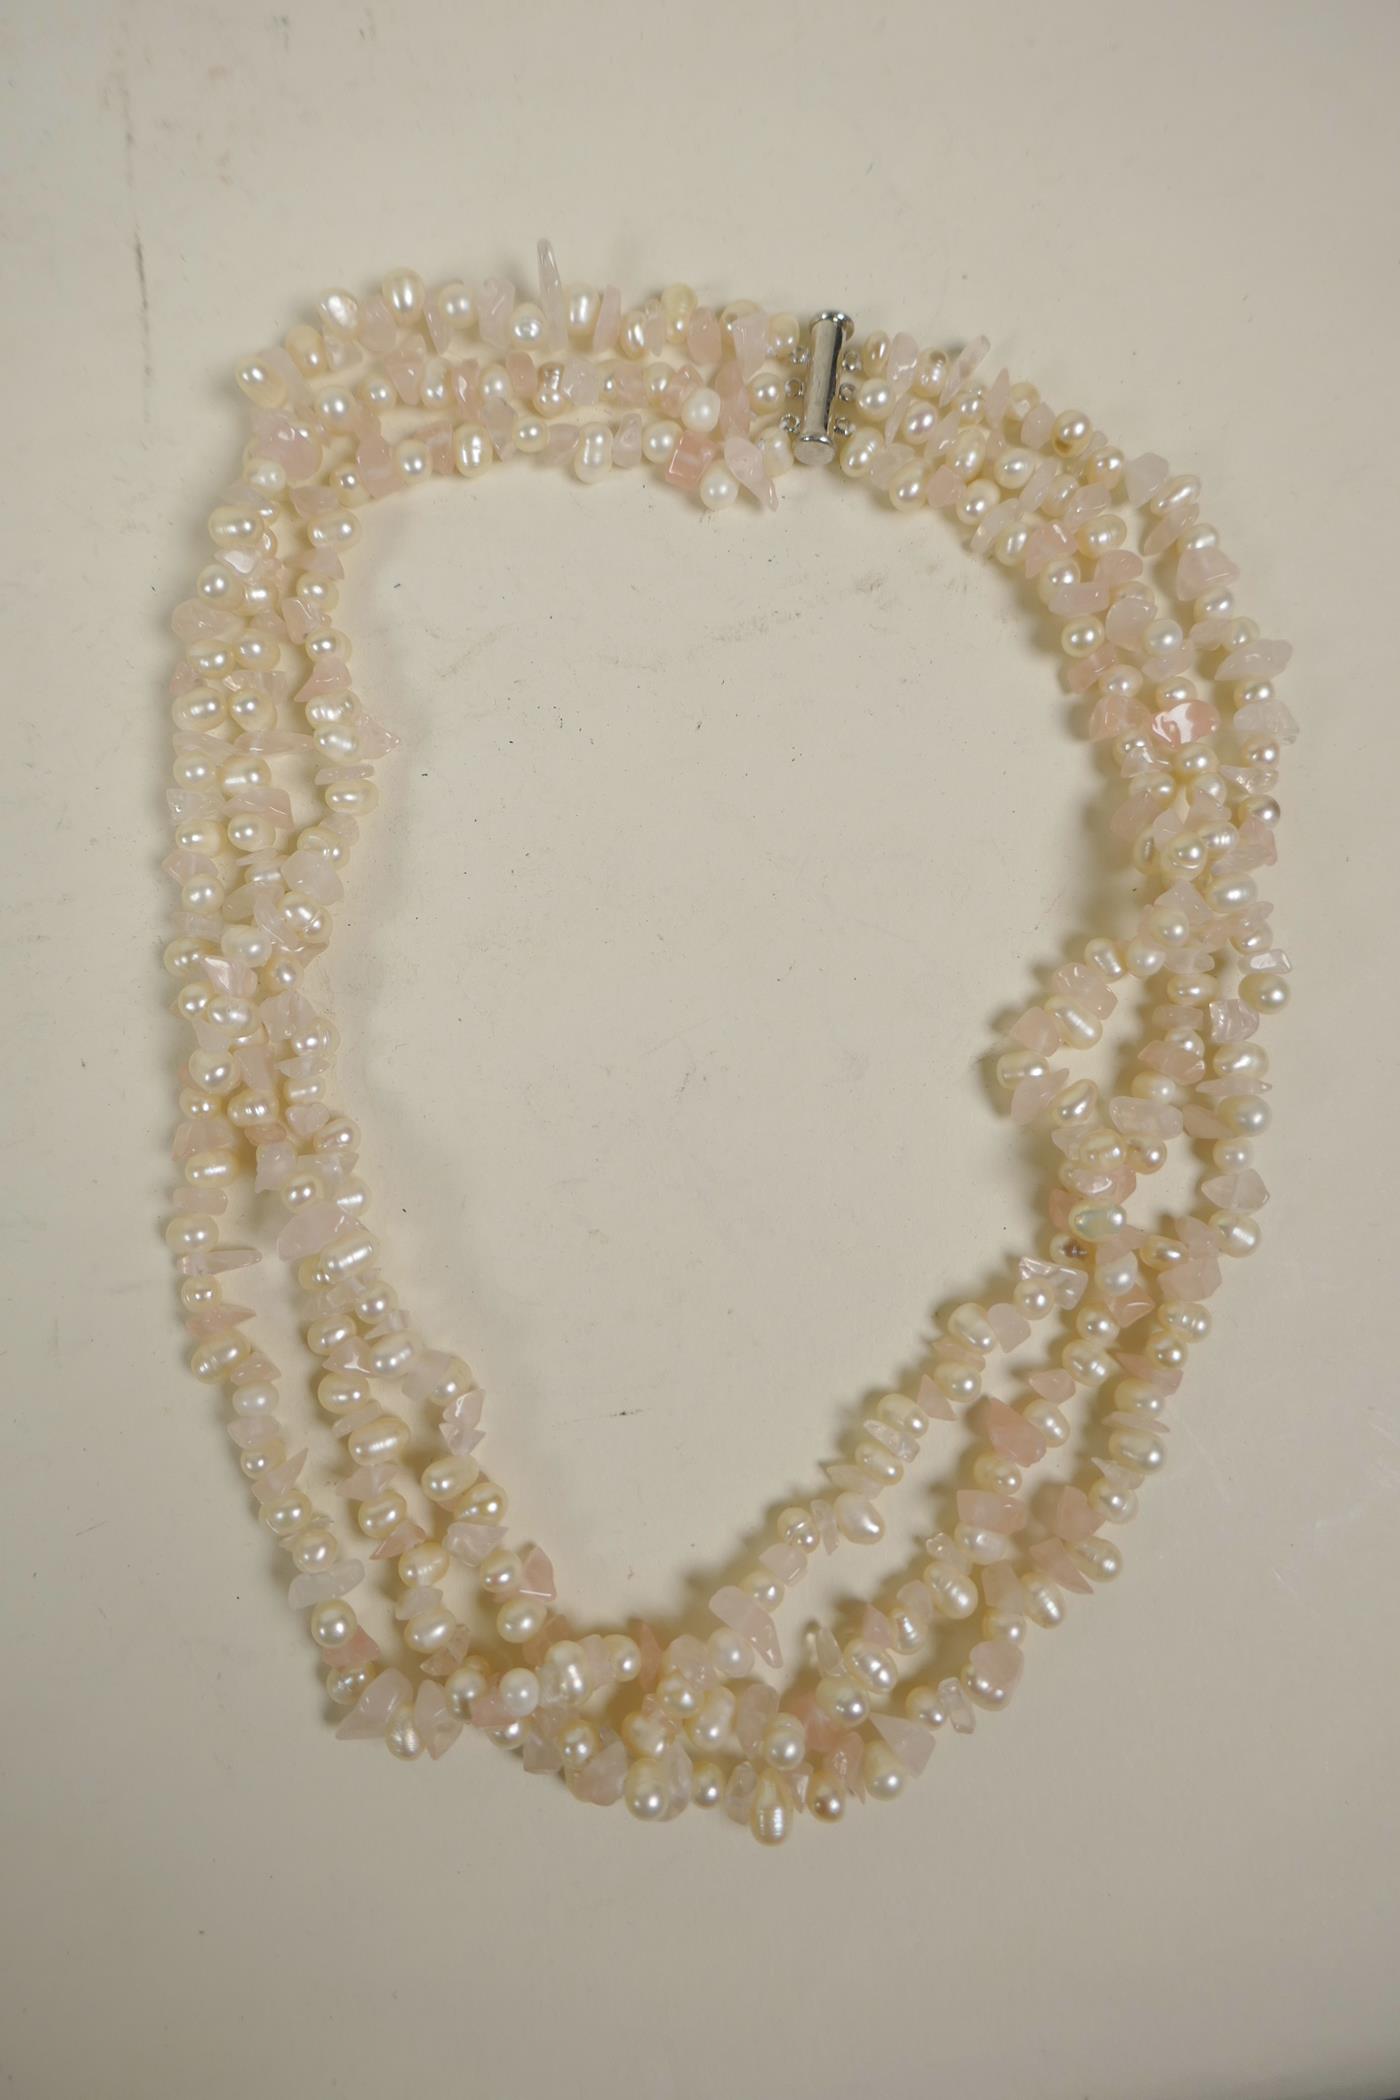 A freshwater pearl and rose quartz triple strand necklace, 18" long